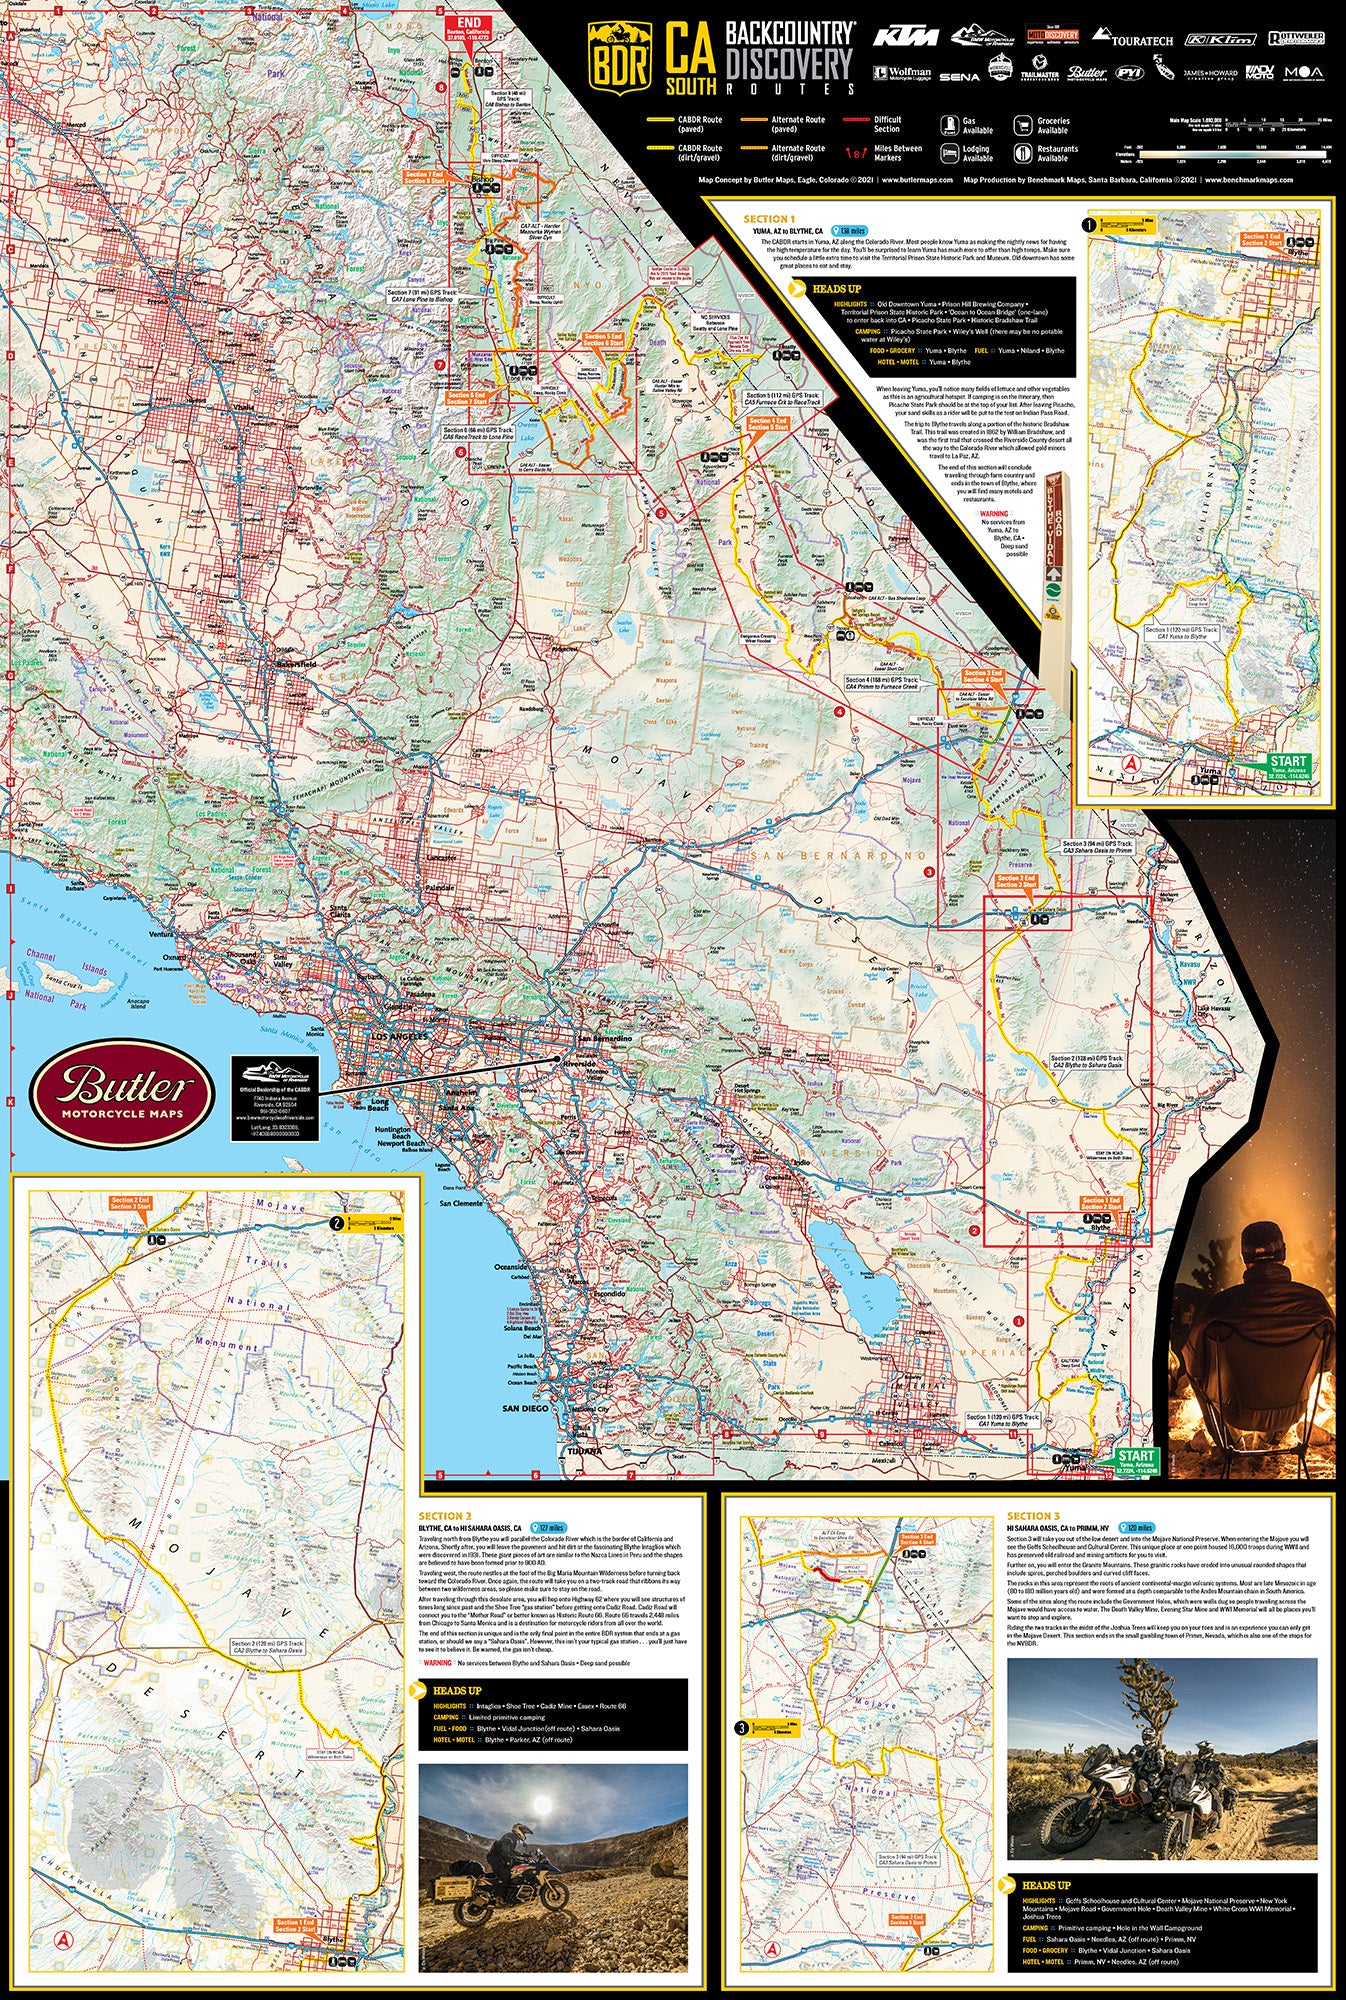 California-South Backcountry Discovery Route Map – V1